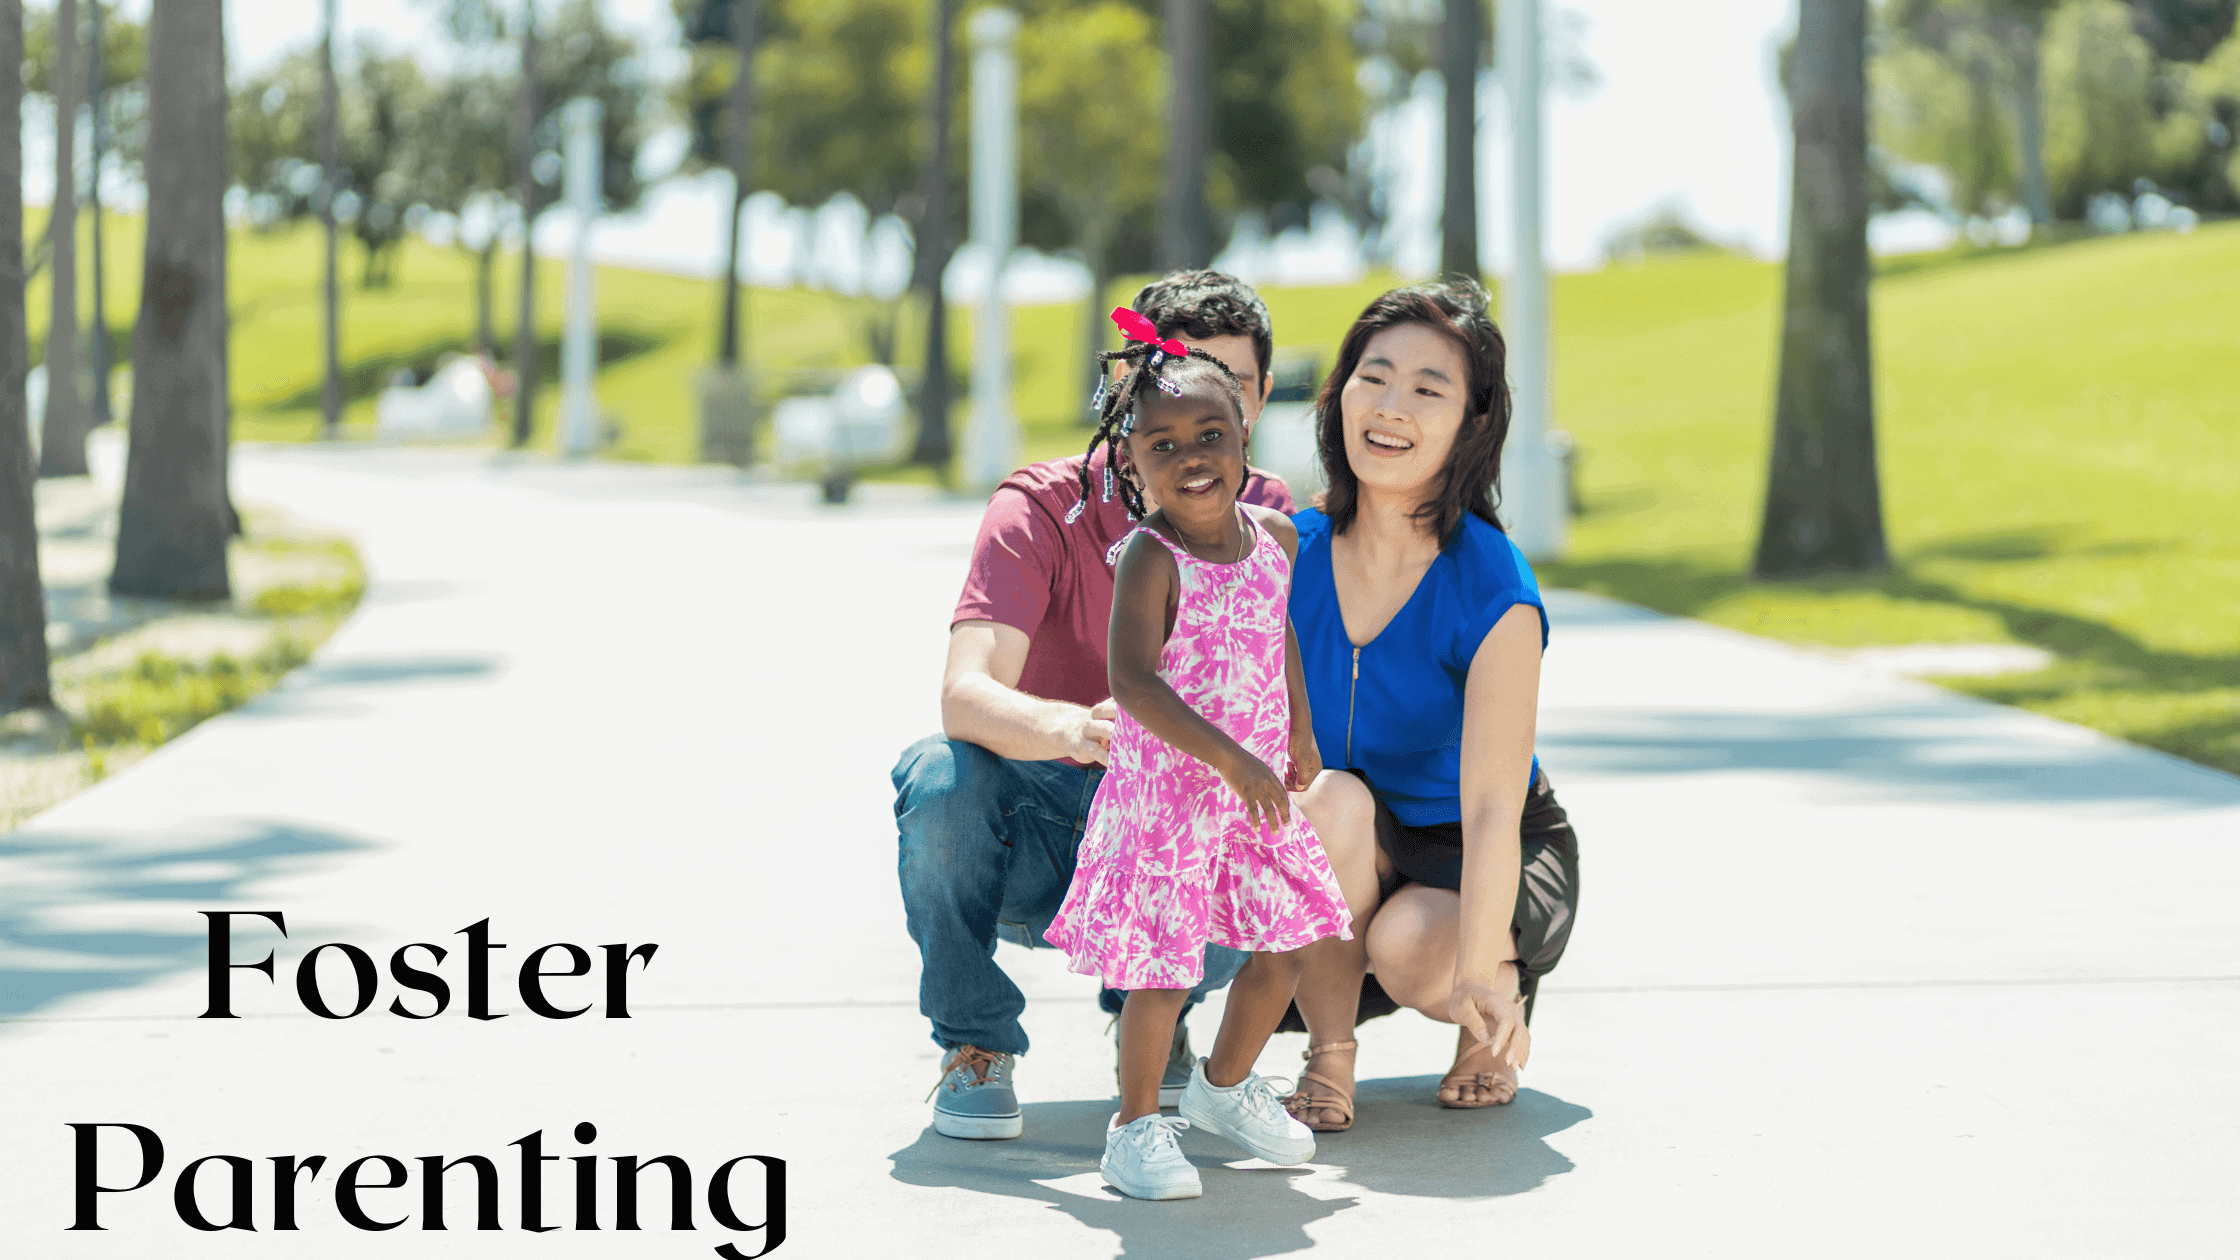 What Makes a Good Foster Parent